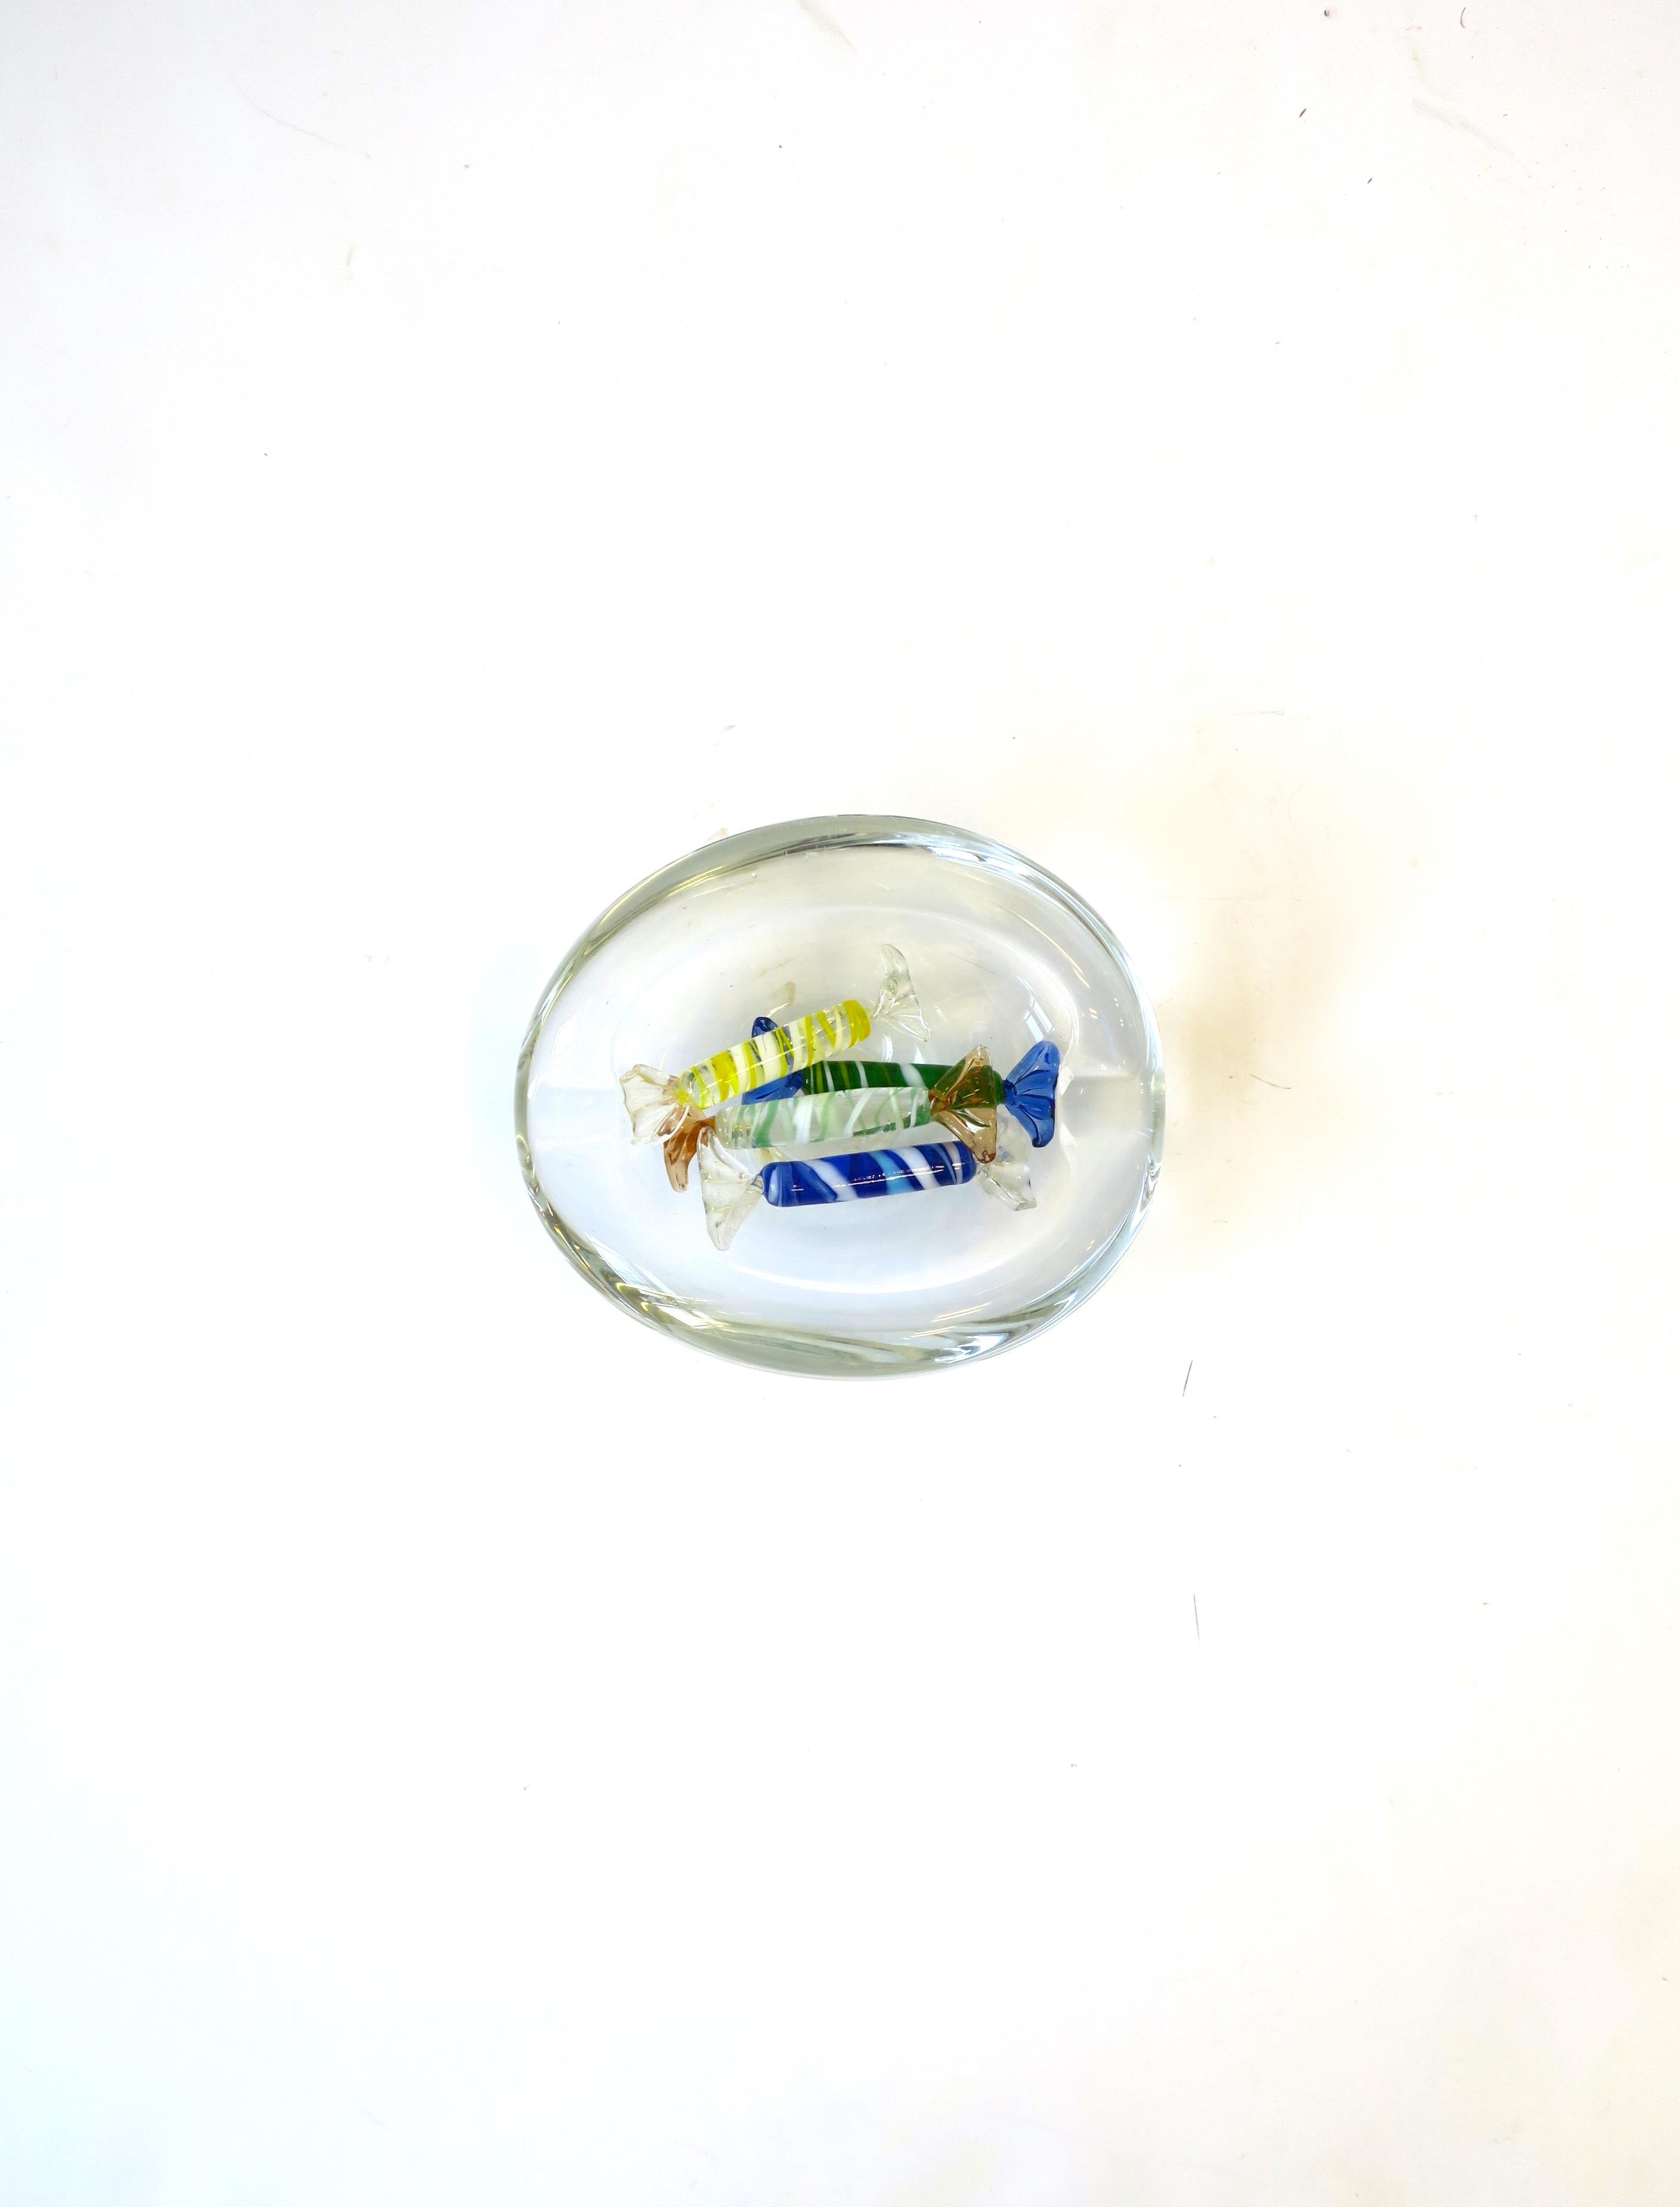 Scandinavian Modern Art Glass Bowl or Ashtray by Holmegaard, 1958 For Sale 2